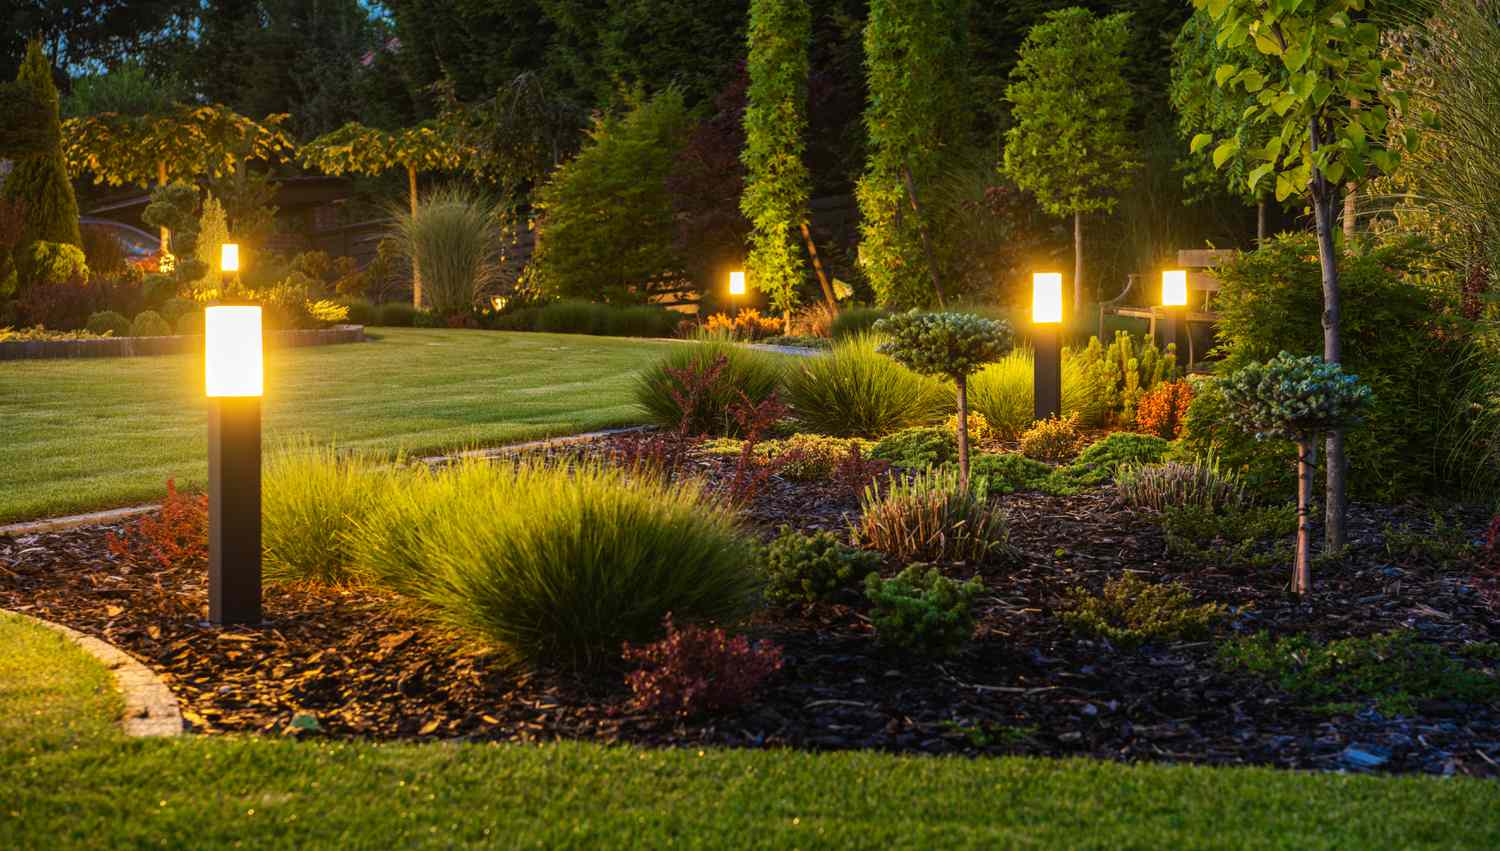 The Modern Magic of Photocell Technology in Landscape Lighting